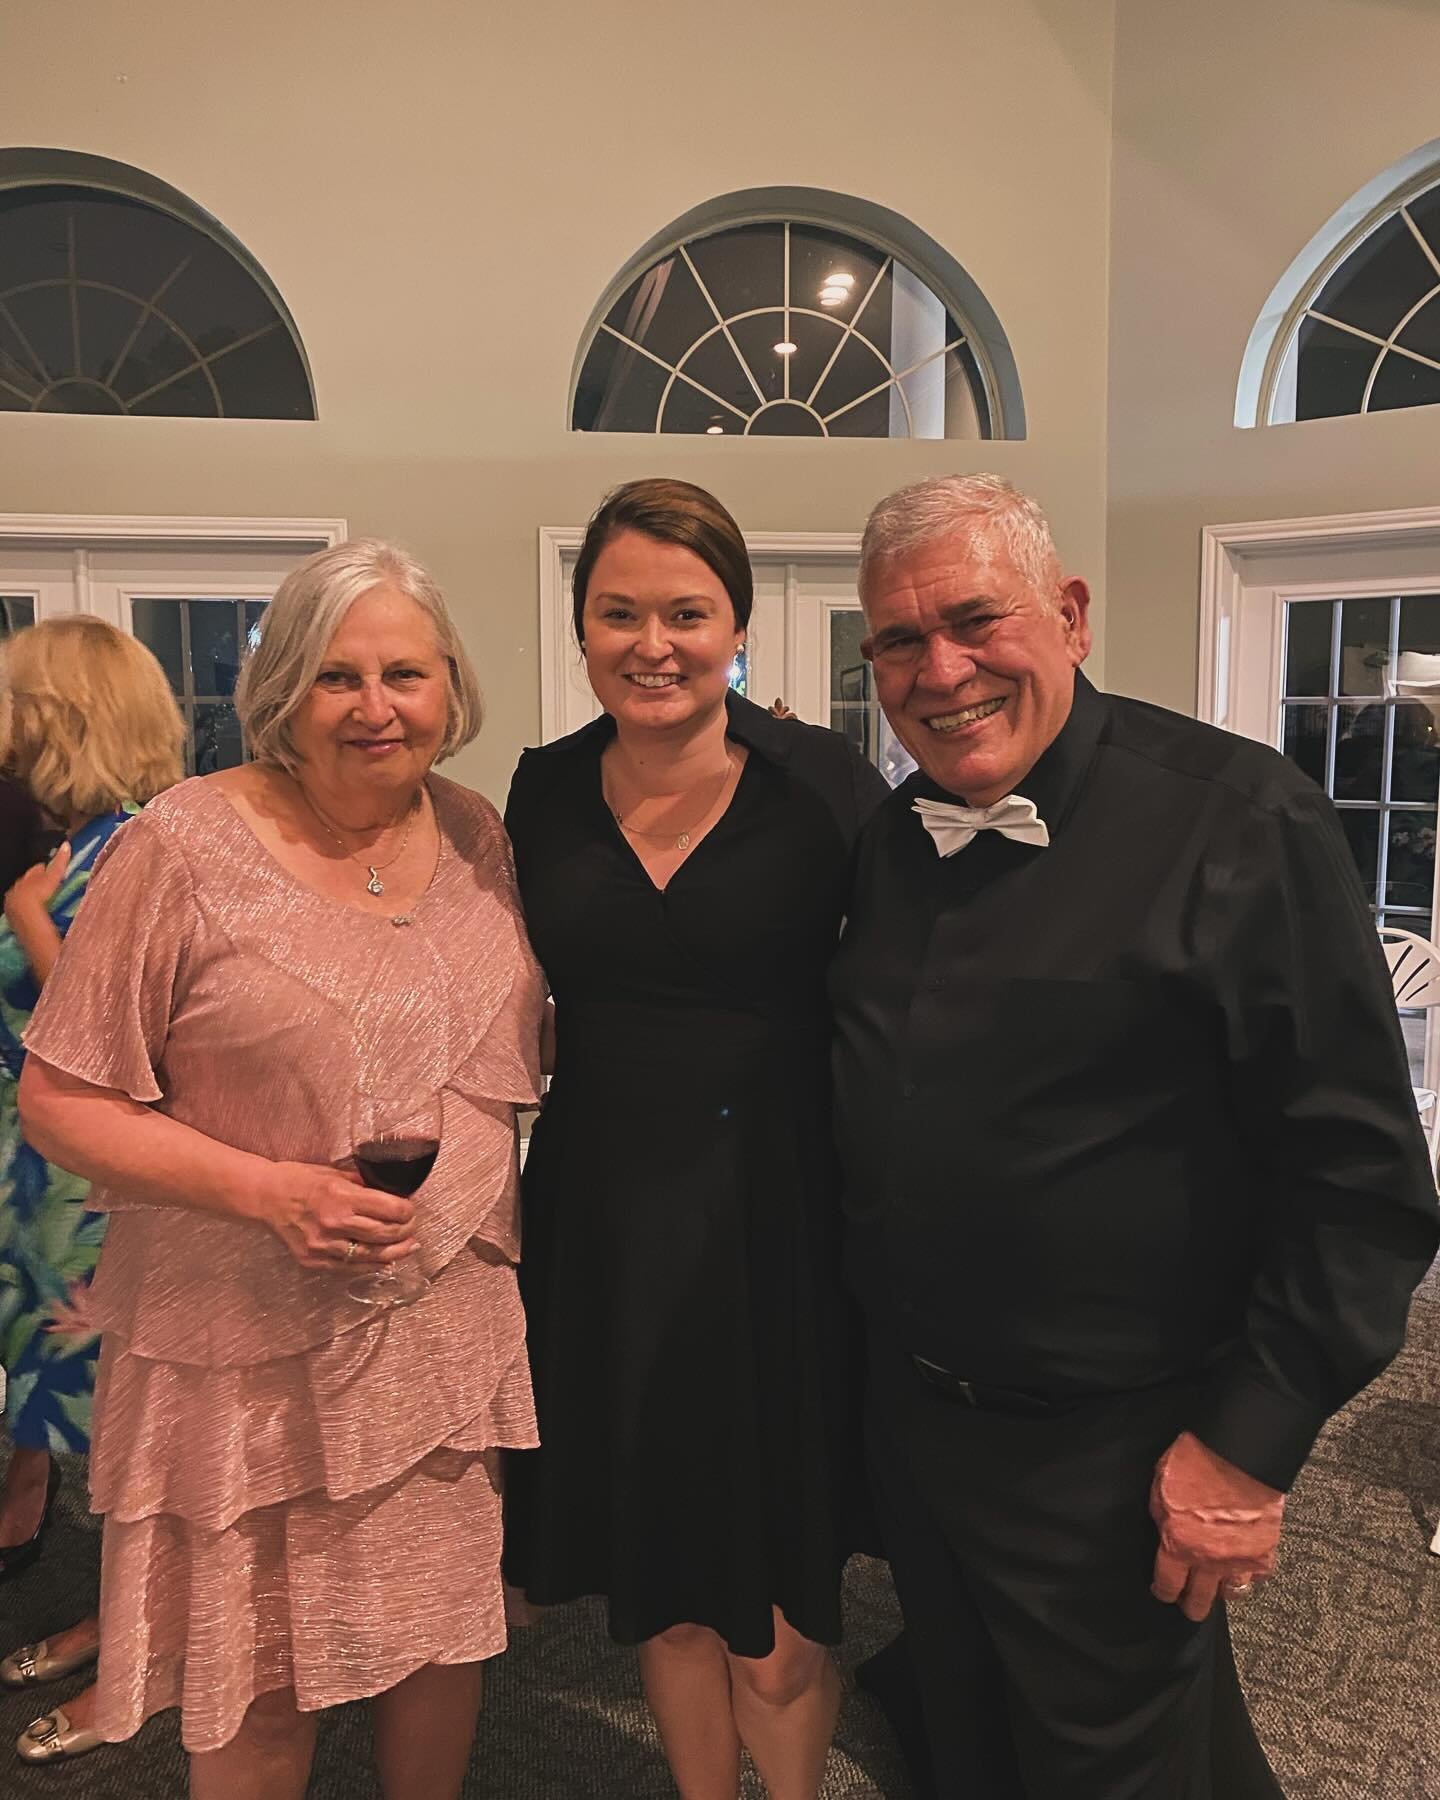 Peggy and George!! Kim&rsquo;s debut wedding to coordinate on her own with Penderview Events!!

I&rsquo;m so thrilled to have Kim on the team and what an amazing day from what she told me. 

Peggy was the sweetest to work with in prepping for her big